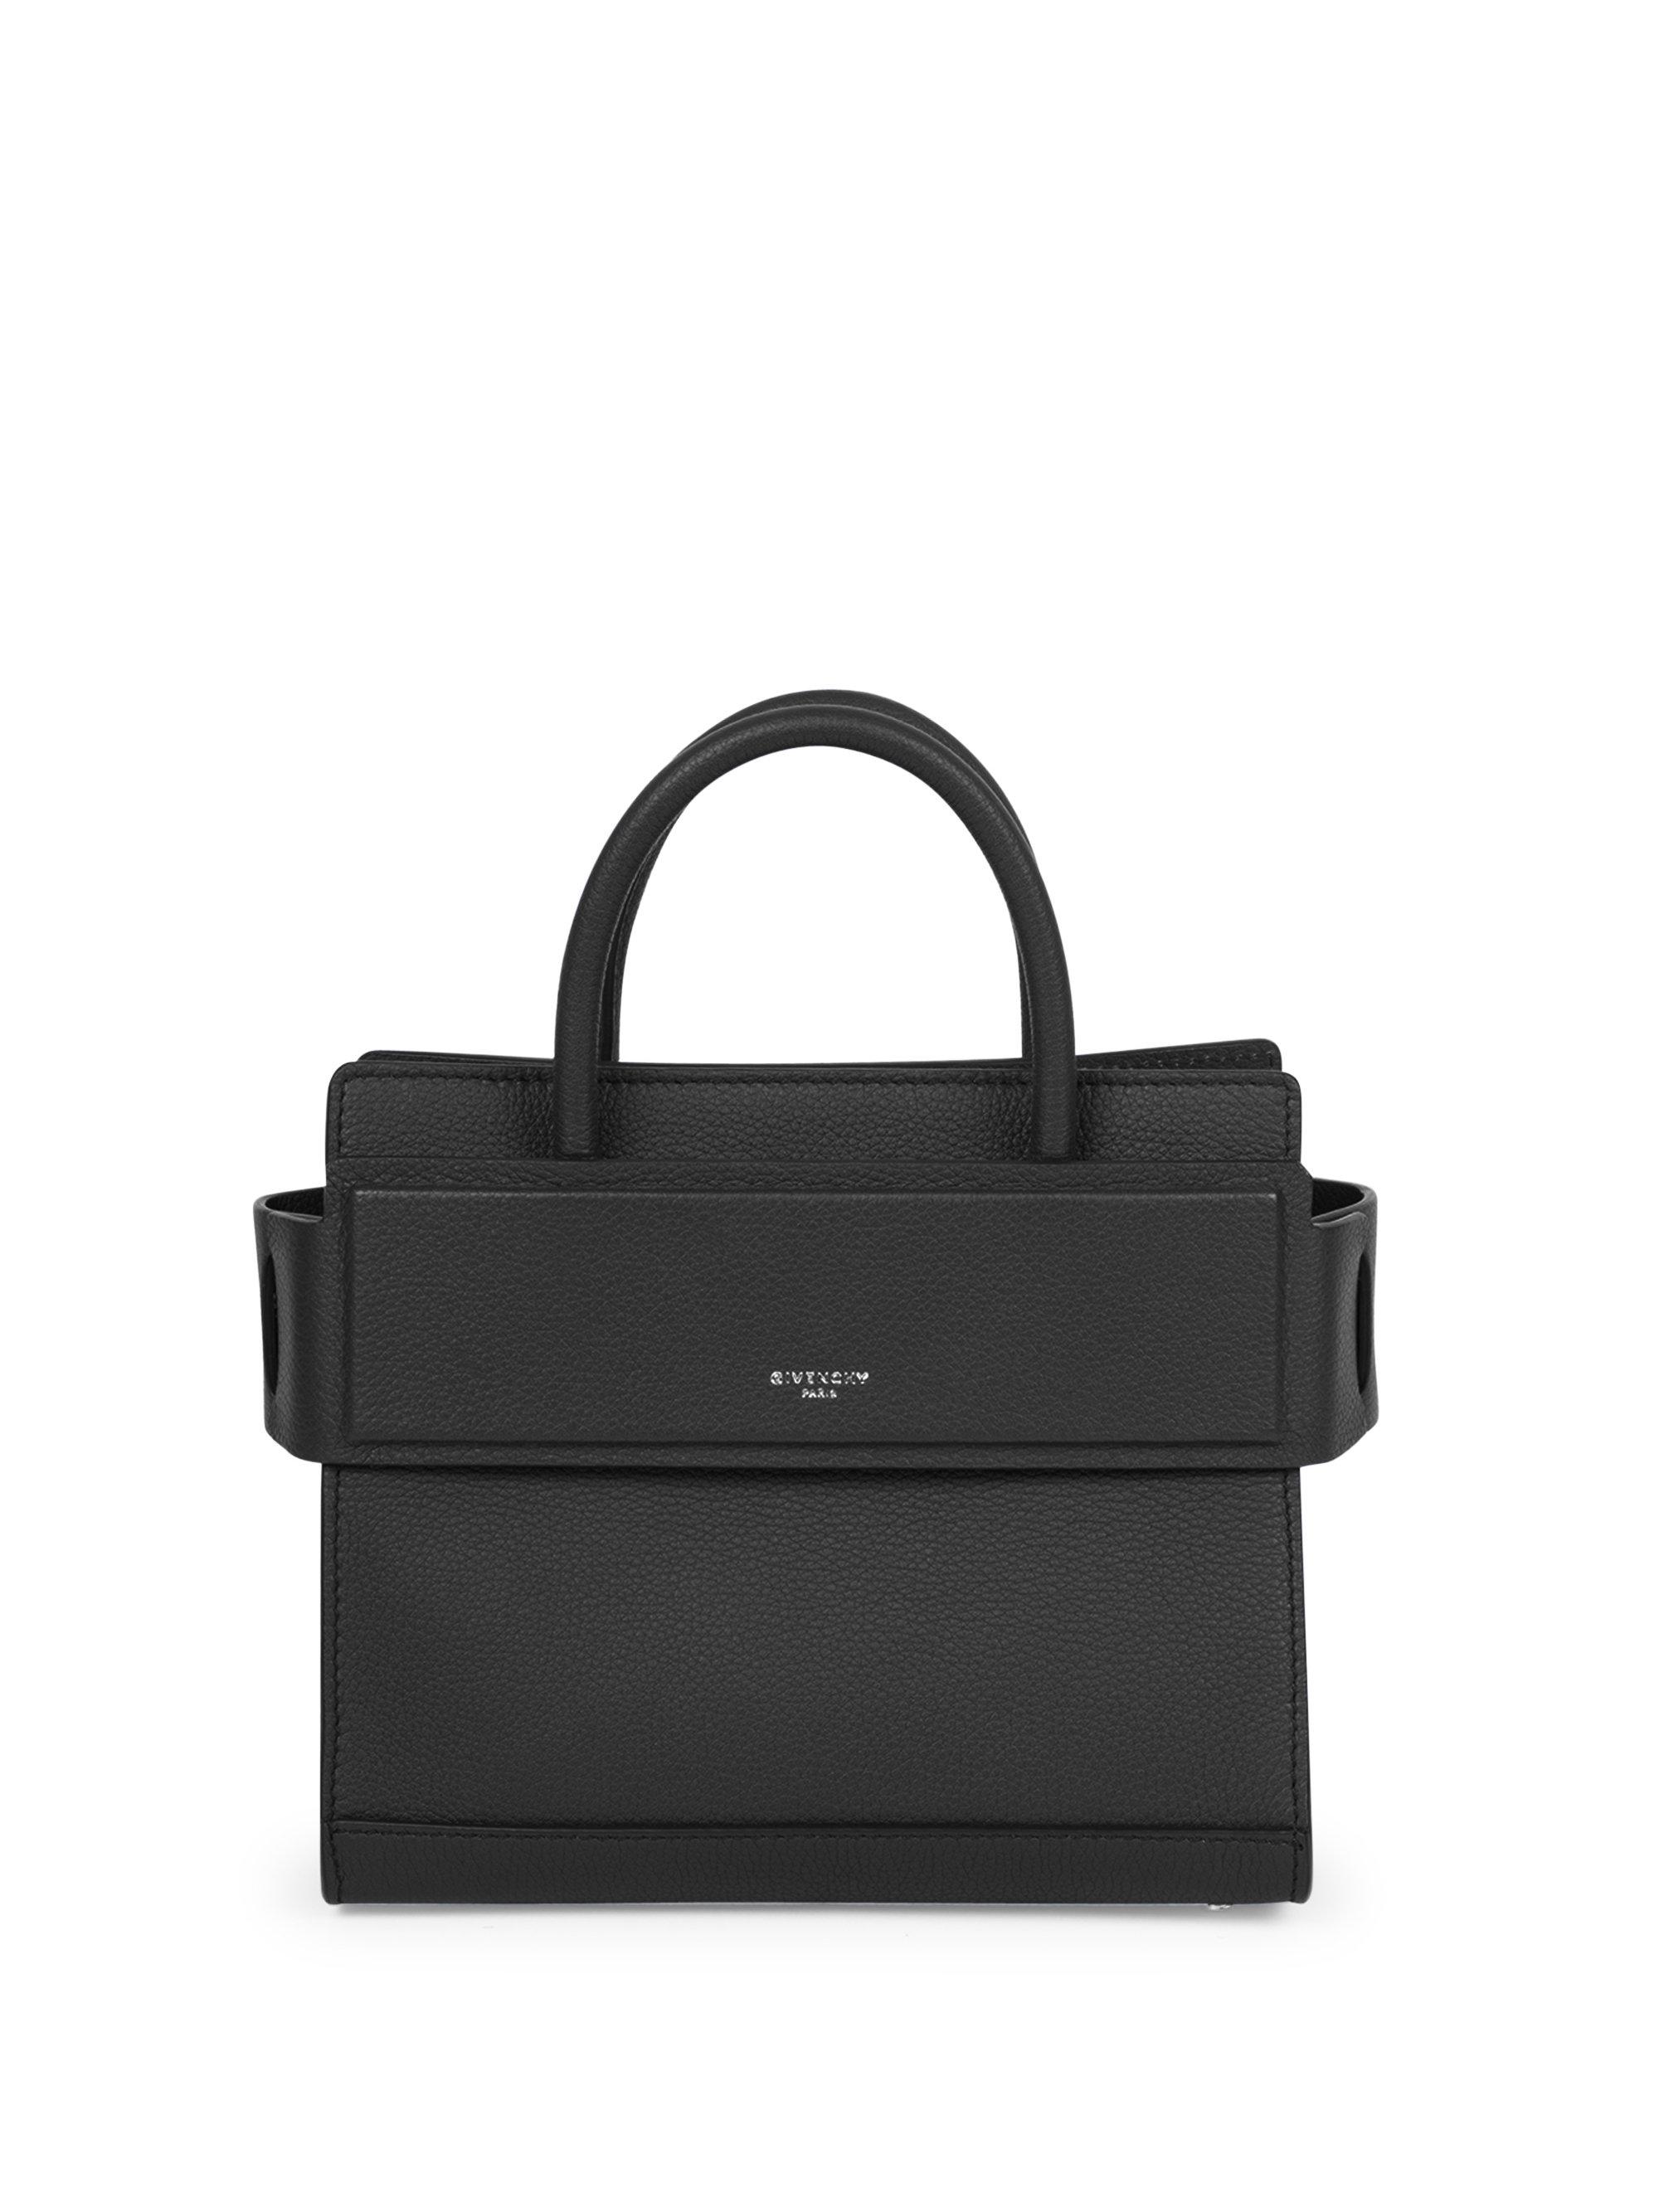 Givenchy Horizon Mini Matte Leather Tote in Black | Lyst